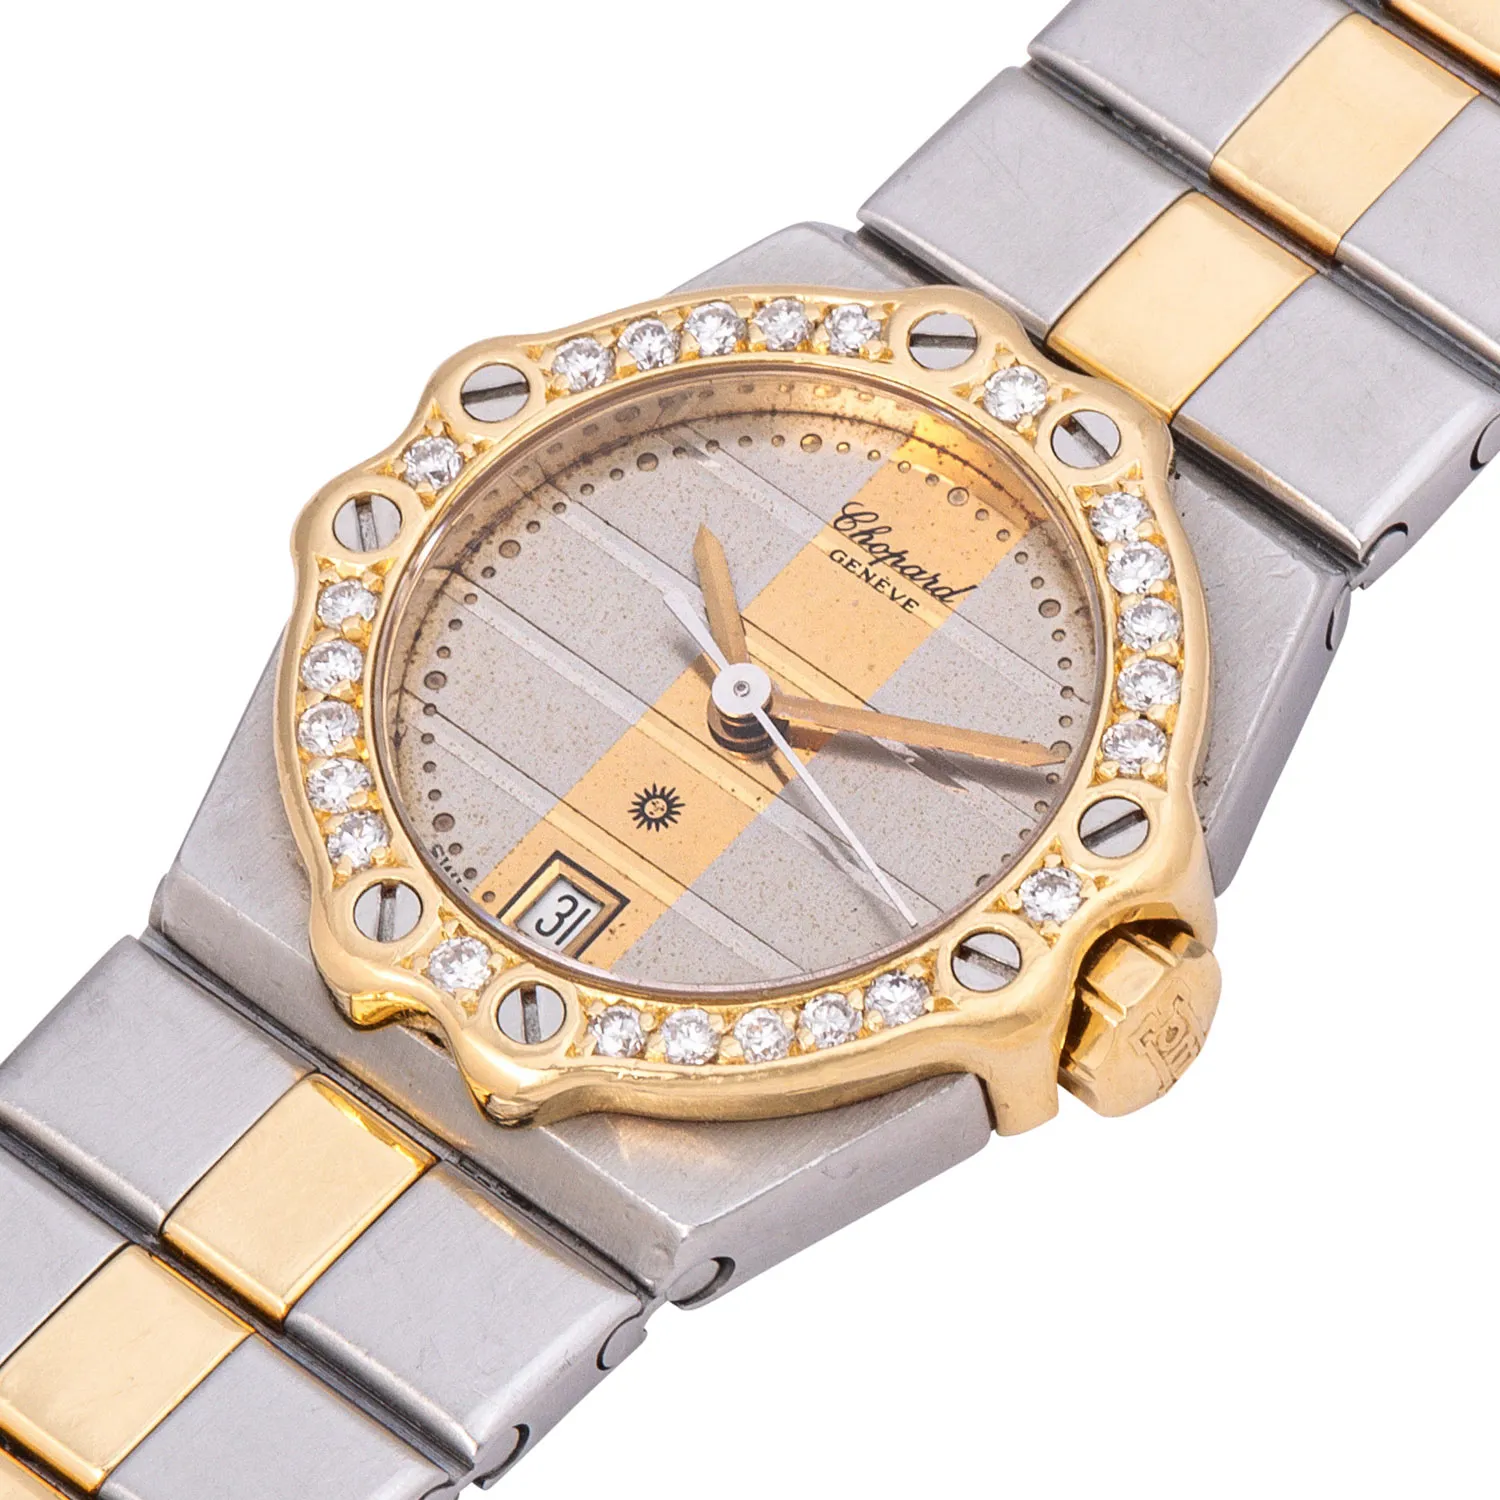 Chopard St. Moritz 8024 24mm Yellow gold, stainless steel and diamond-set 4